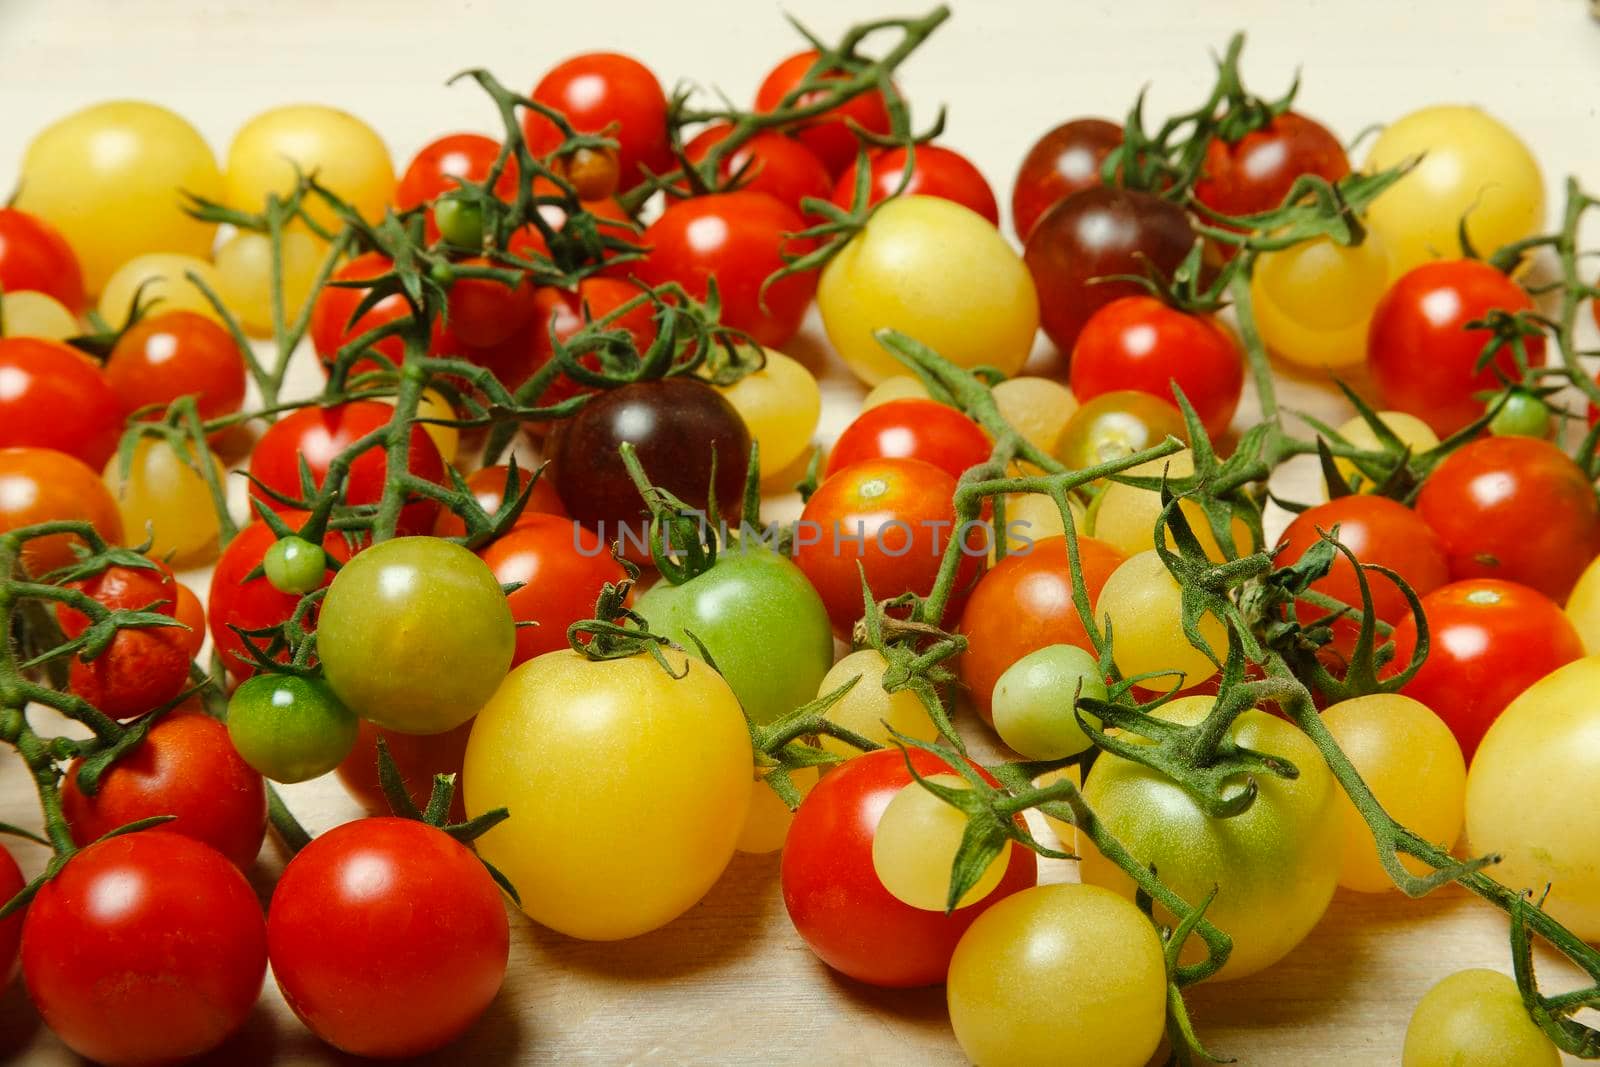 Little red, yellow, green and black cherry tomatoes on white table, nature background, pattern. by Vera_FoodandGarden